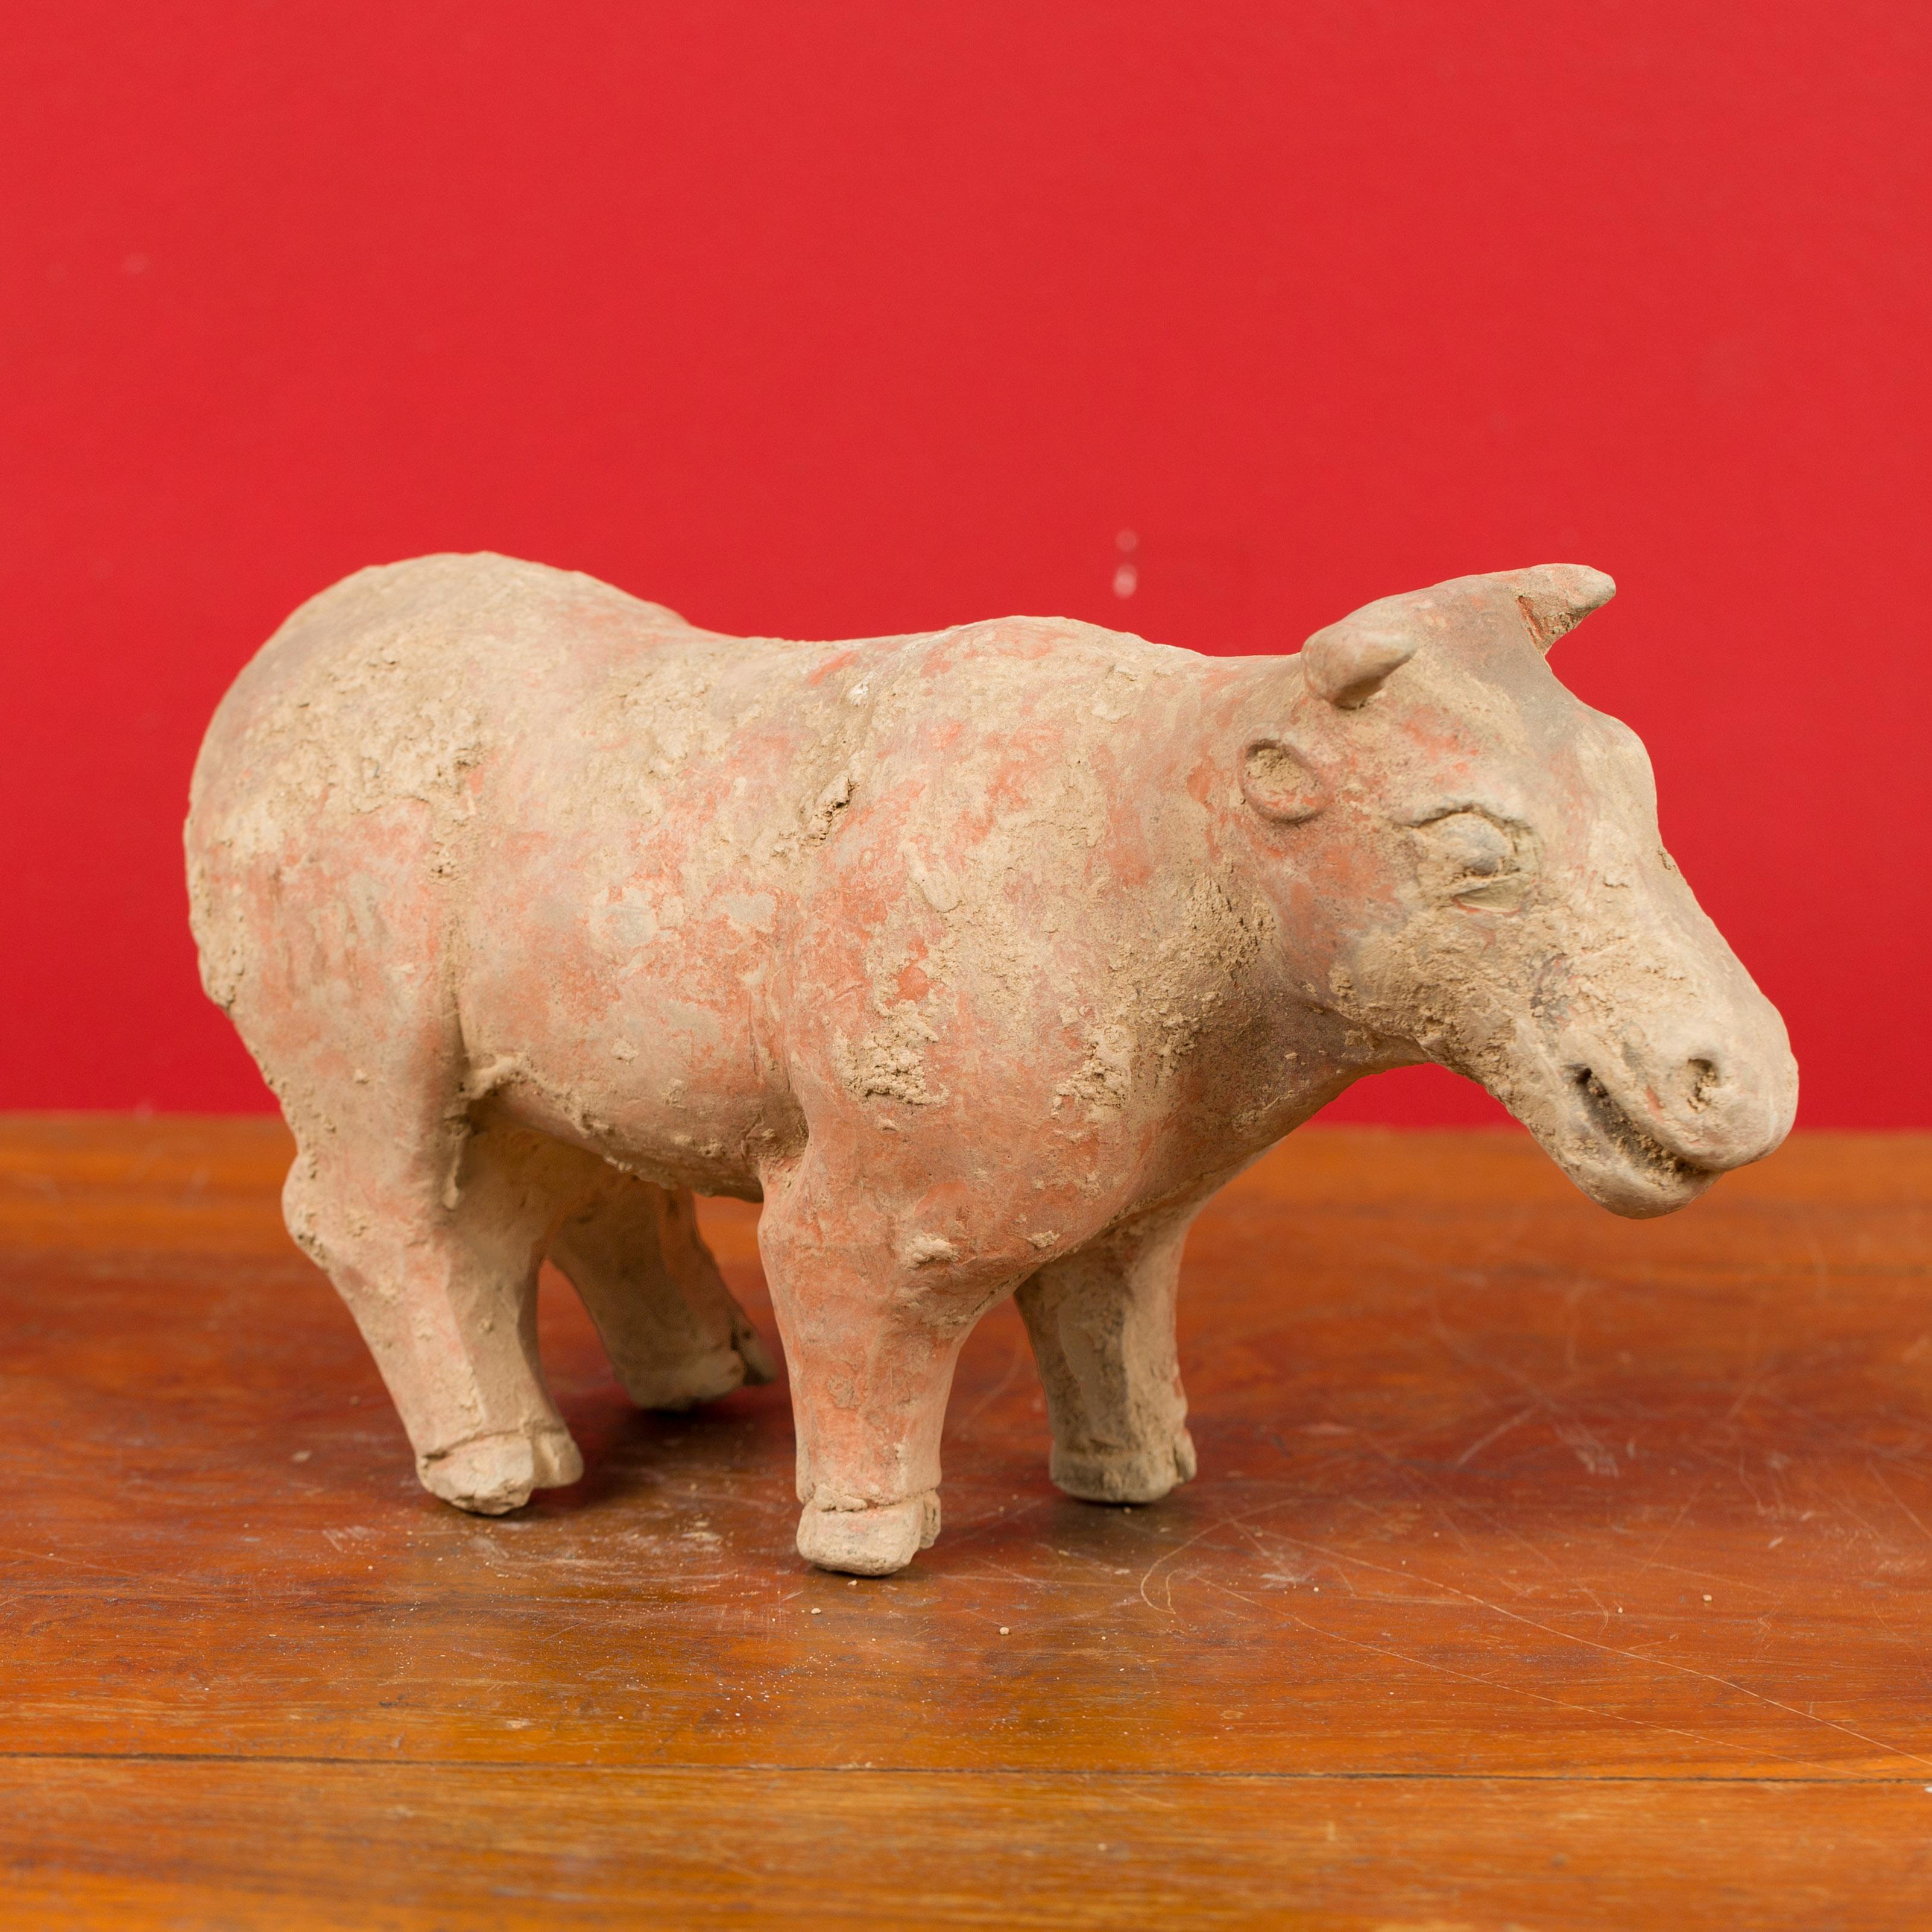 A small Chinese Han Dynasty terracotta bull Mingqi circa 202 BC-200 AD. Born in China during the Han Dynasty, this petite ancient terracotta sculpture presents a bull in standing position. Referred to as a Mingqi, this terracotta bull was likely a